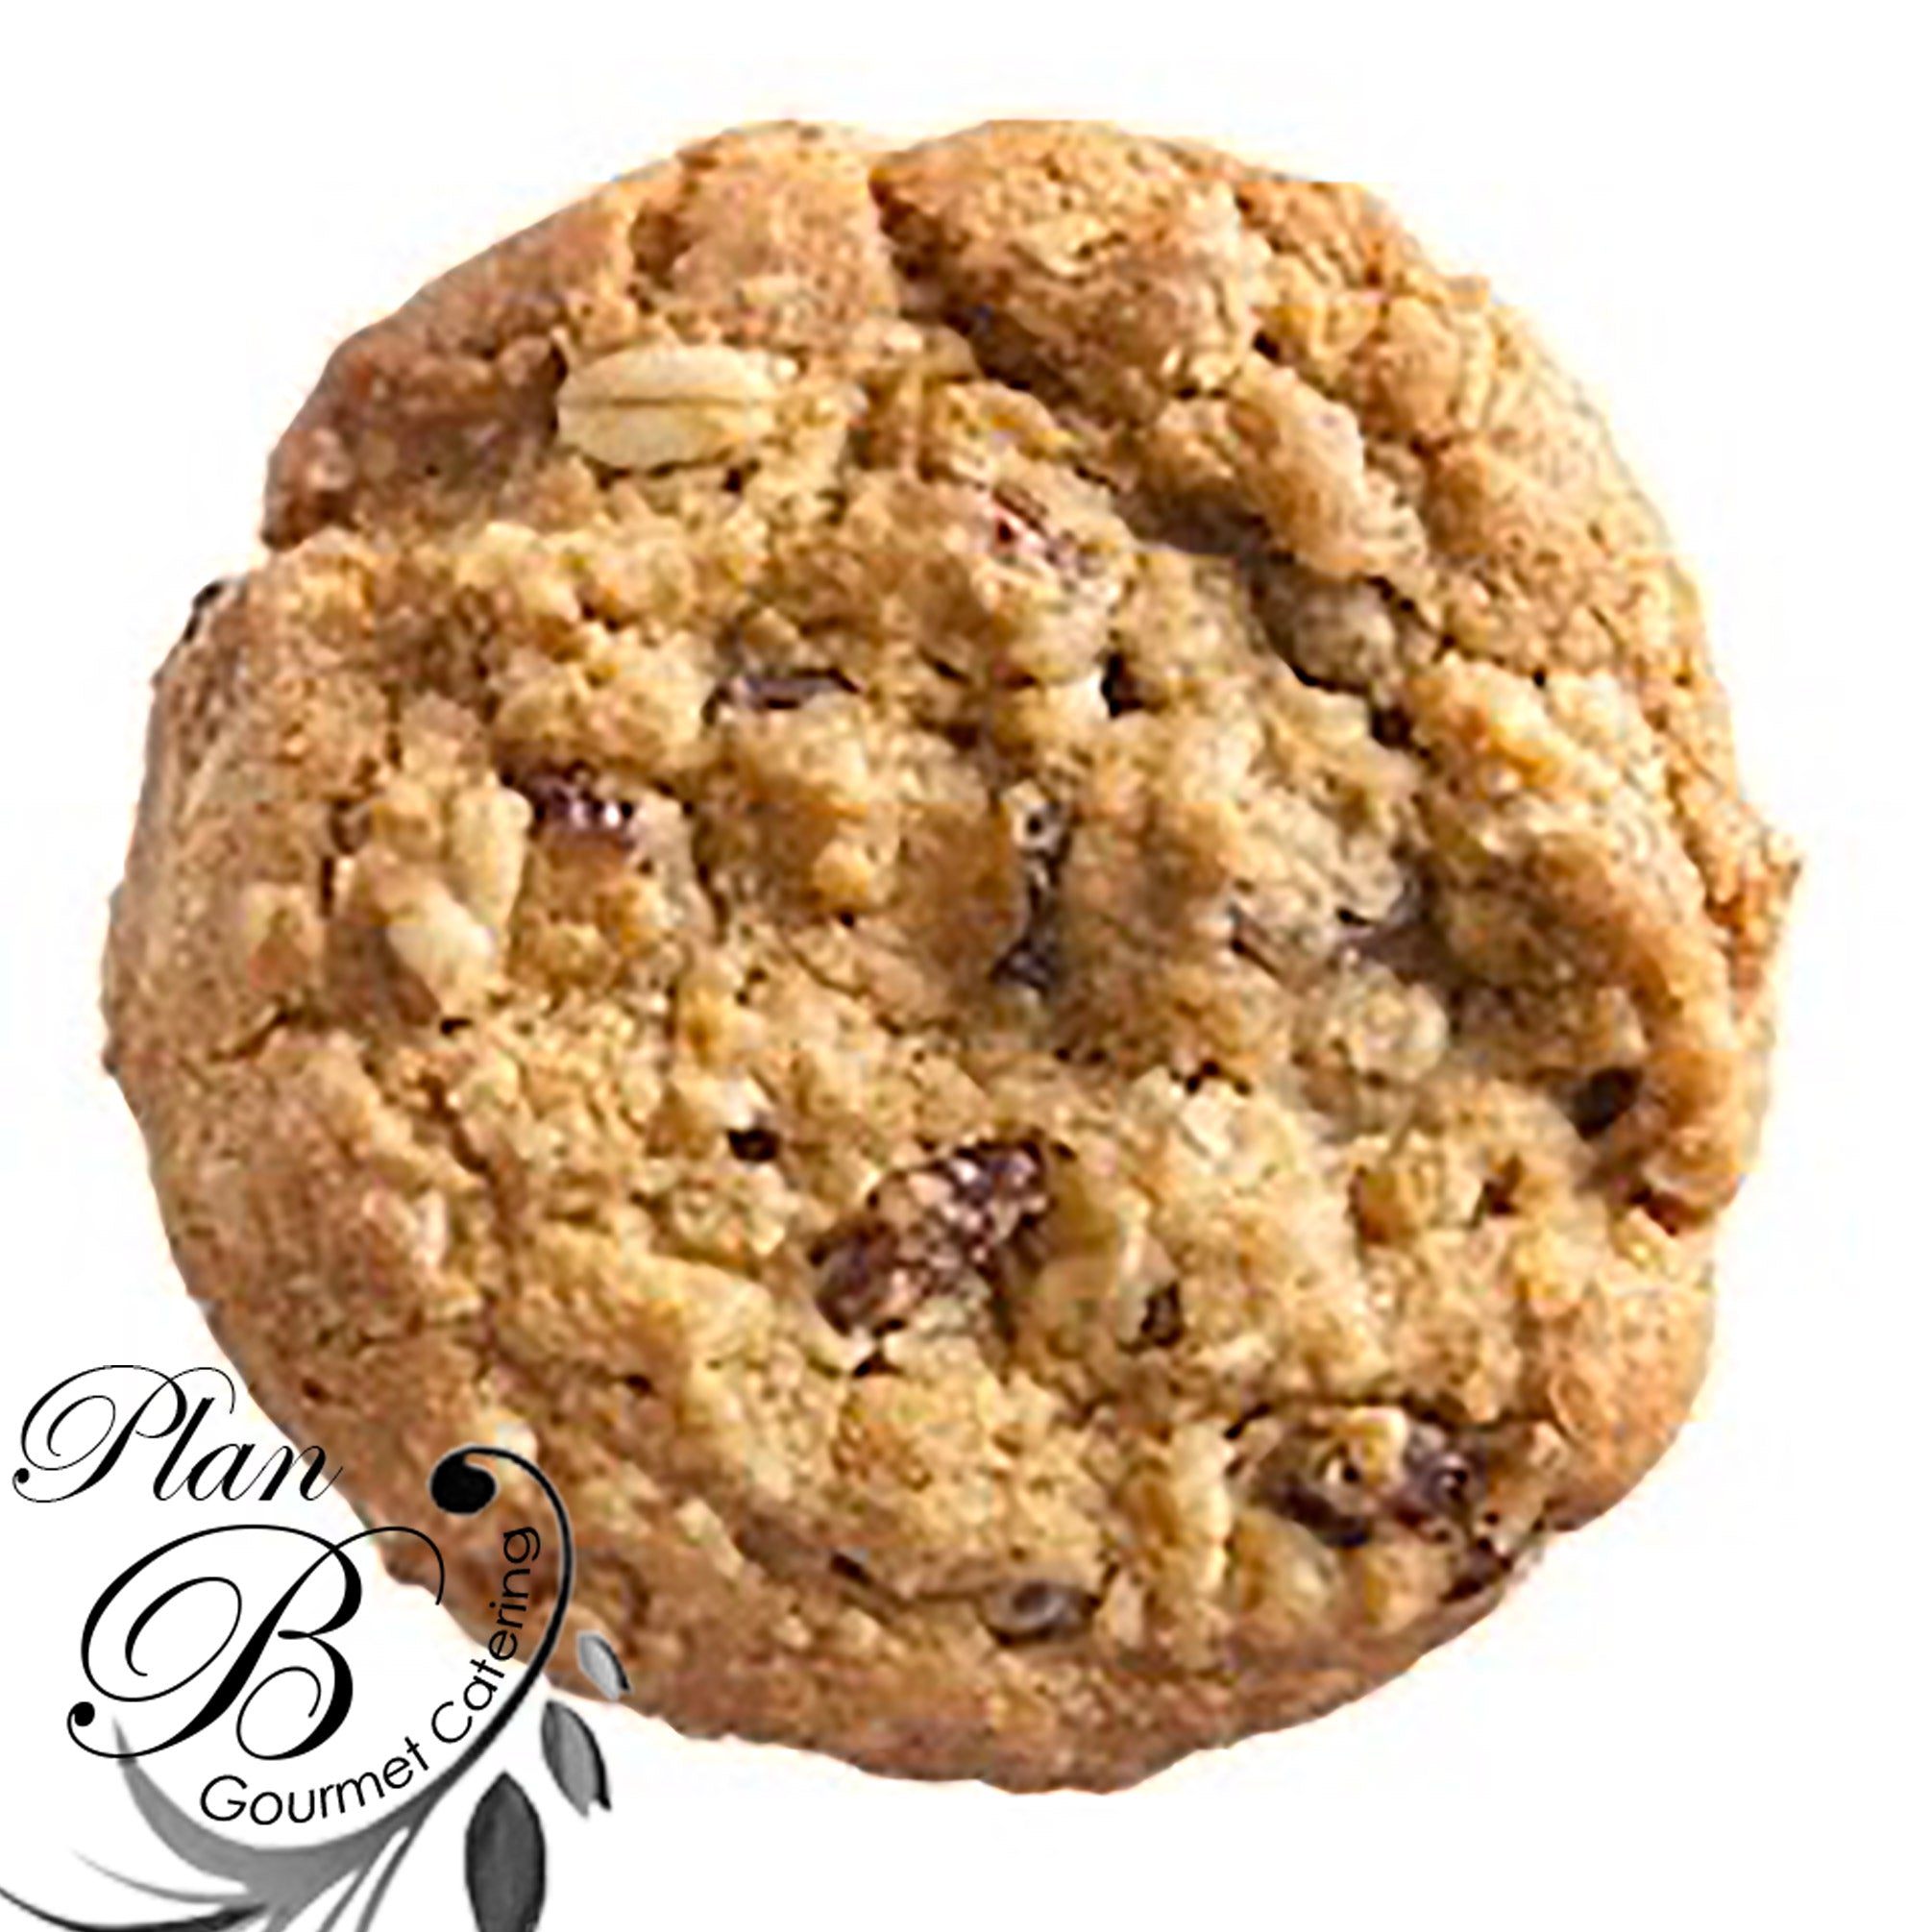 #PlanB #Gourmet meals online by professional #Chef and #Mexican #Cuisine @Canada gourmet foods online best food gifts order gourmet food basket delivery cuisine luxury meals fancy food gifts gourmet food de cuisine specialty gourmet food shipped catering order gourmet food near me online gourmet restaurant taste good professional chef palate good taste website best gourmet food delivery send meal #Oatmeal Raising Cookies